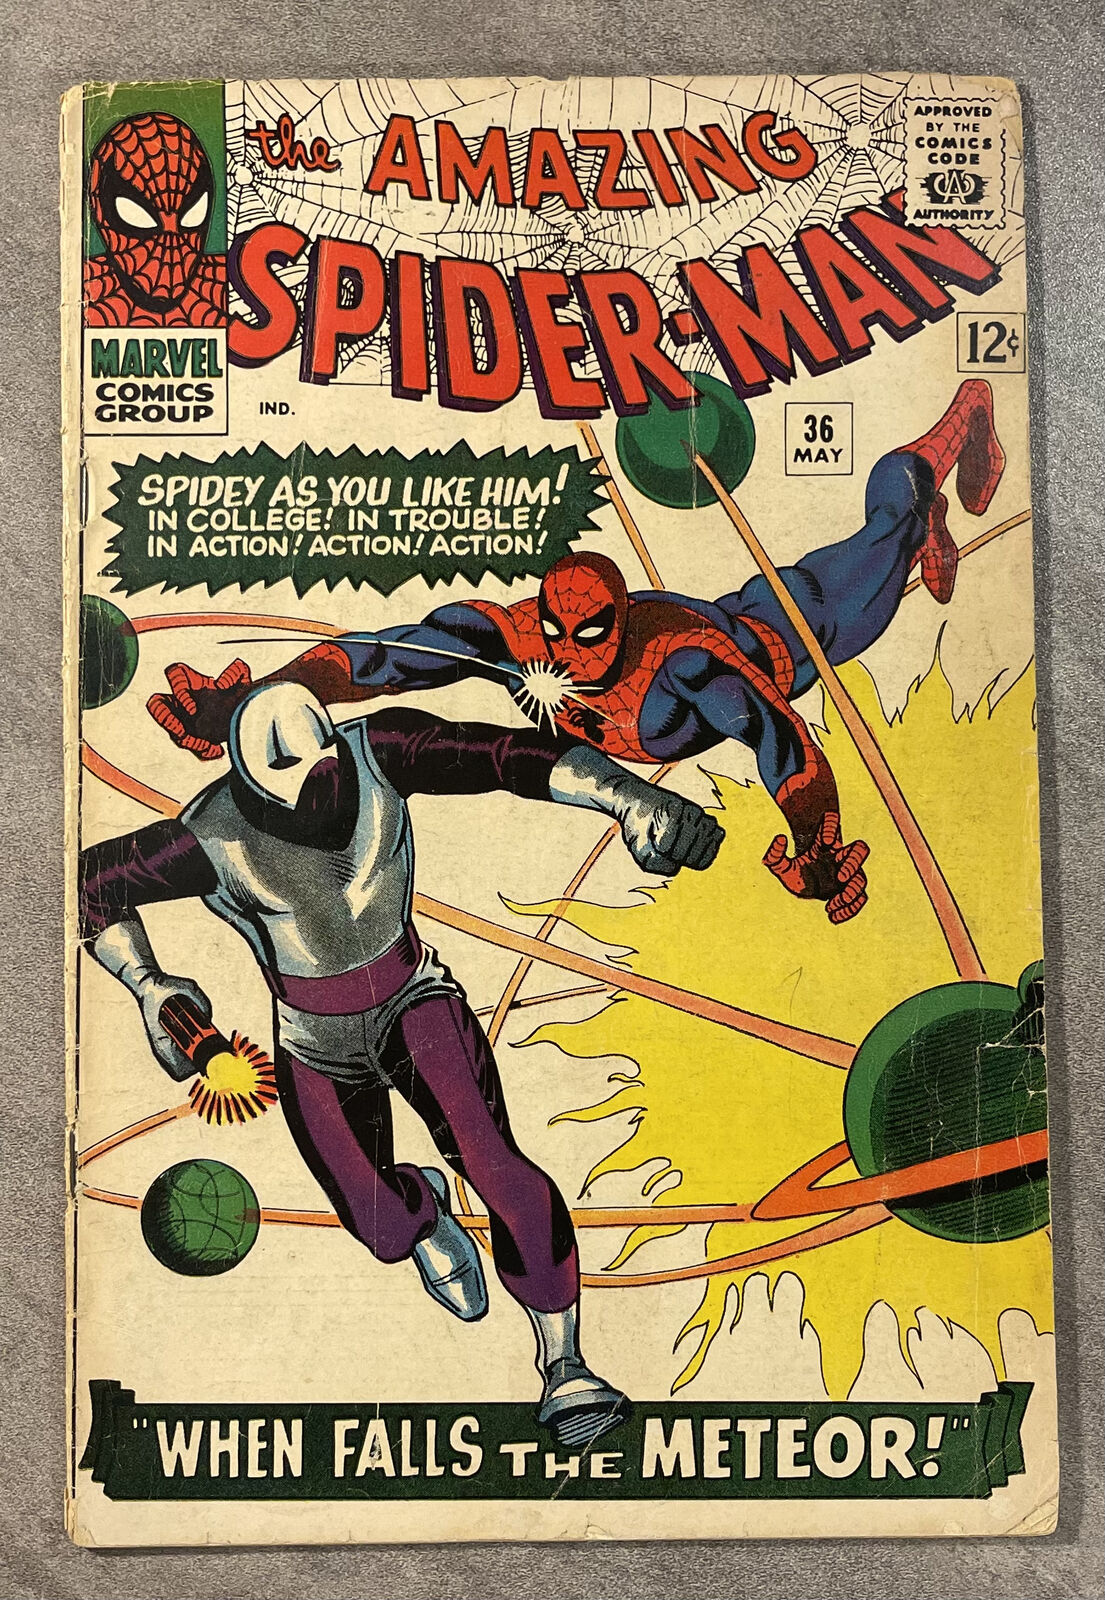 THE AMAZING SPIDER-MAN #36 MAY 1966 - *FIRST LOOTER  SILVER AGE MARVEL GOOD +